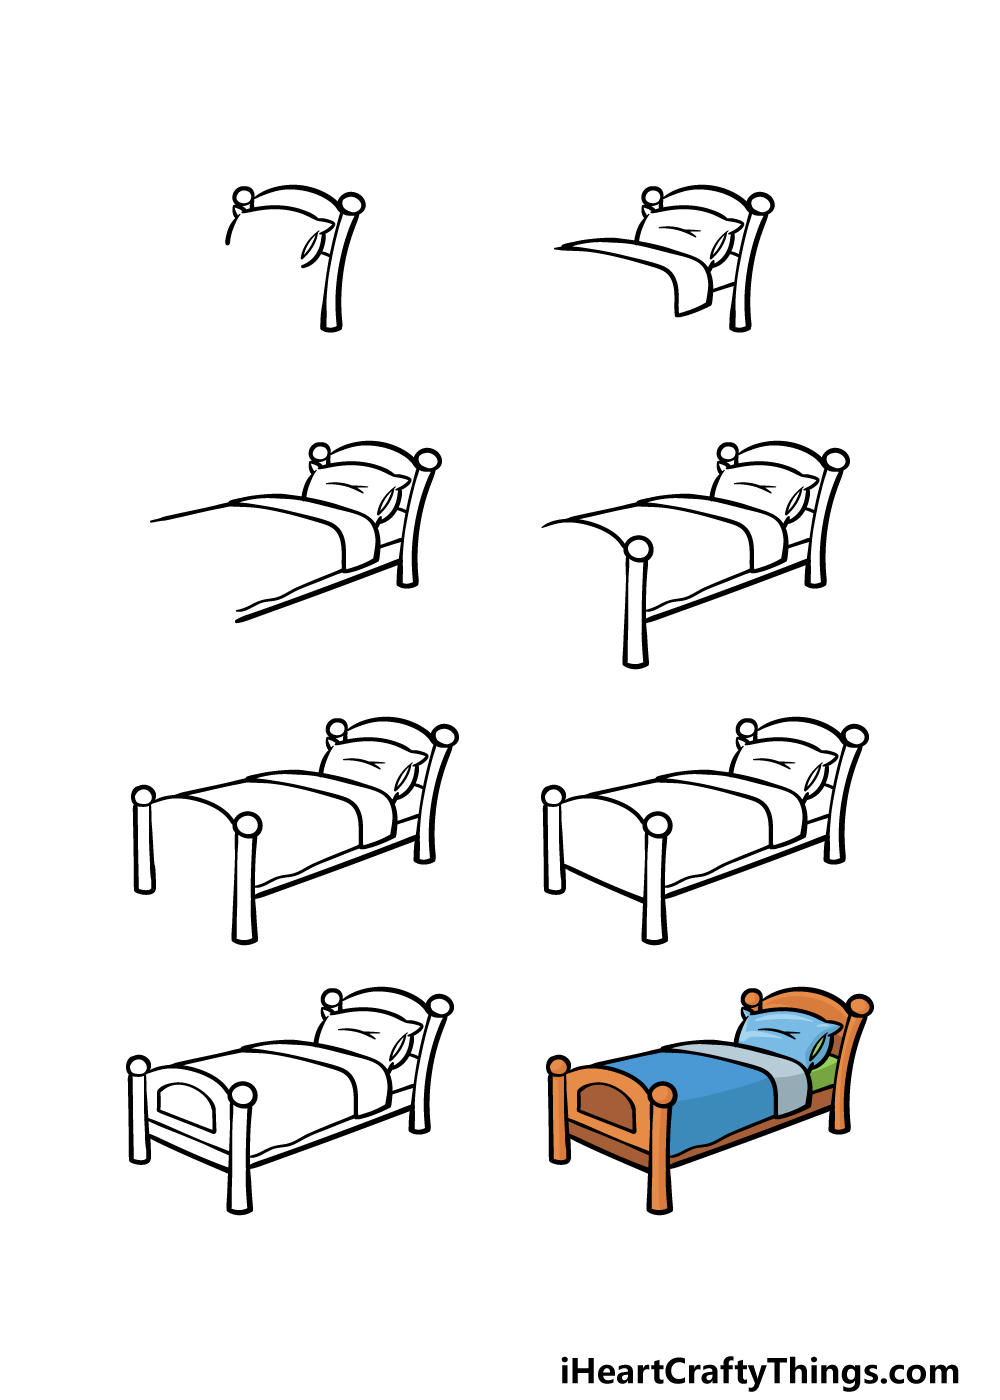 how to draw a cartoon bed in 8 steps